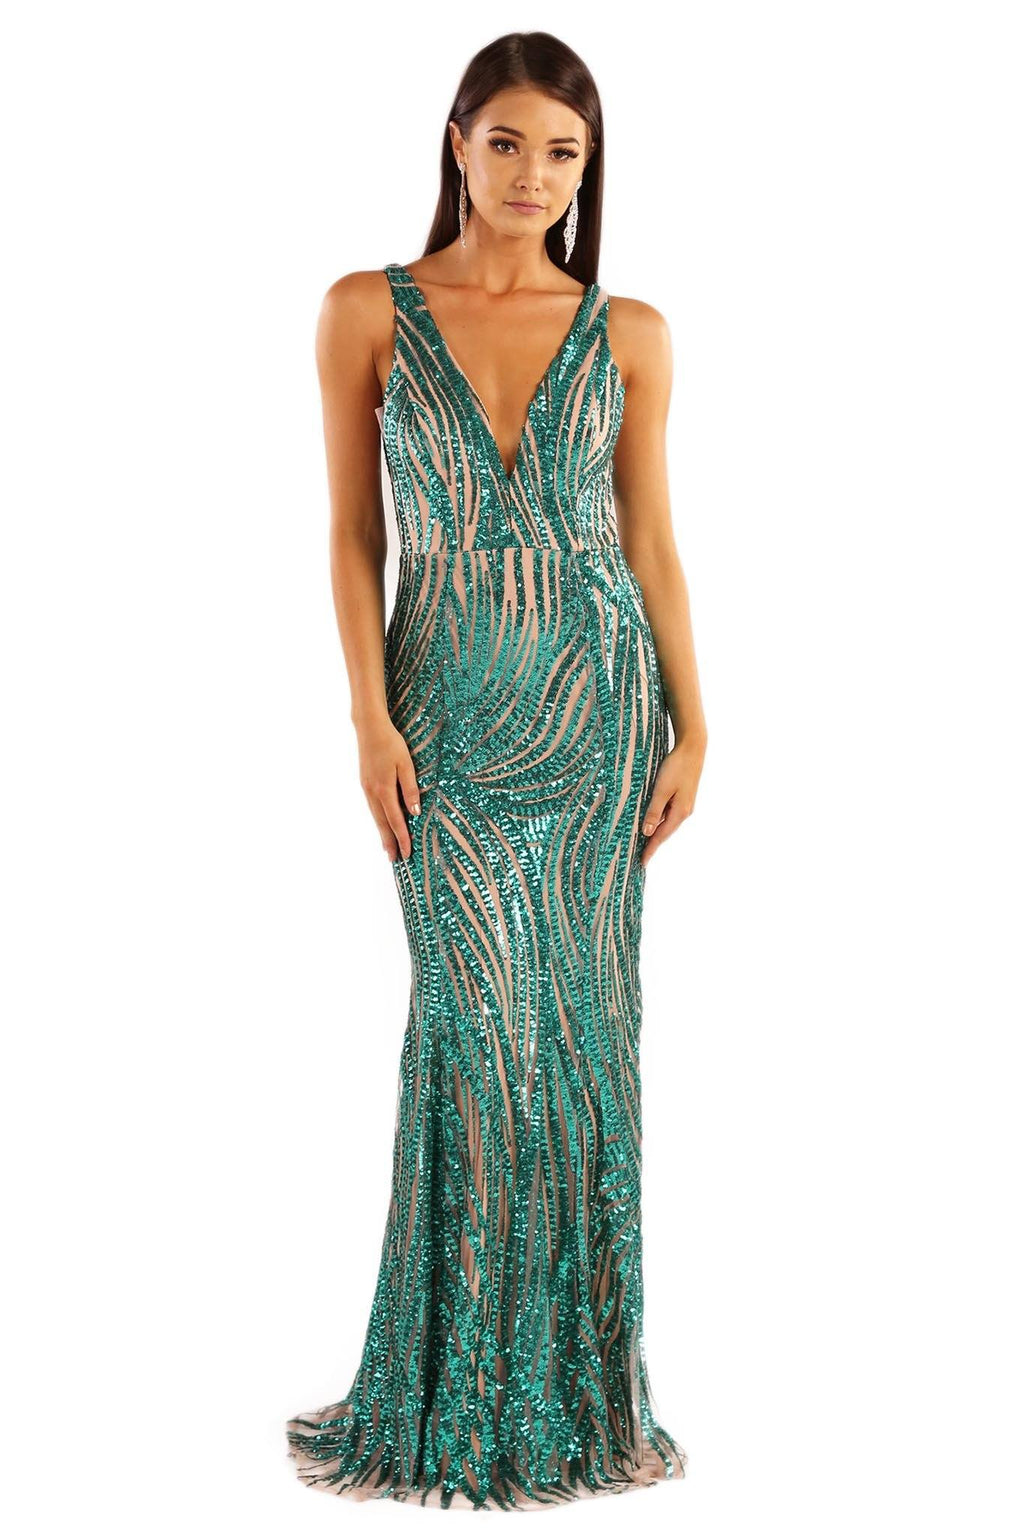 Emerald Green Fitted Floor Length Formal Sequin Gown with Wavy Stripes of Embroidered Bright Green Sequins on Nude Lining, V Plunge Neckline and Open Back Design